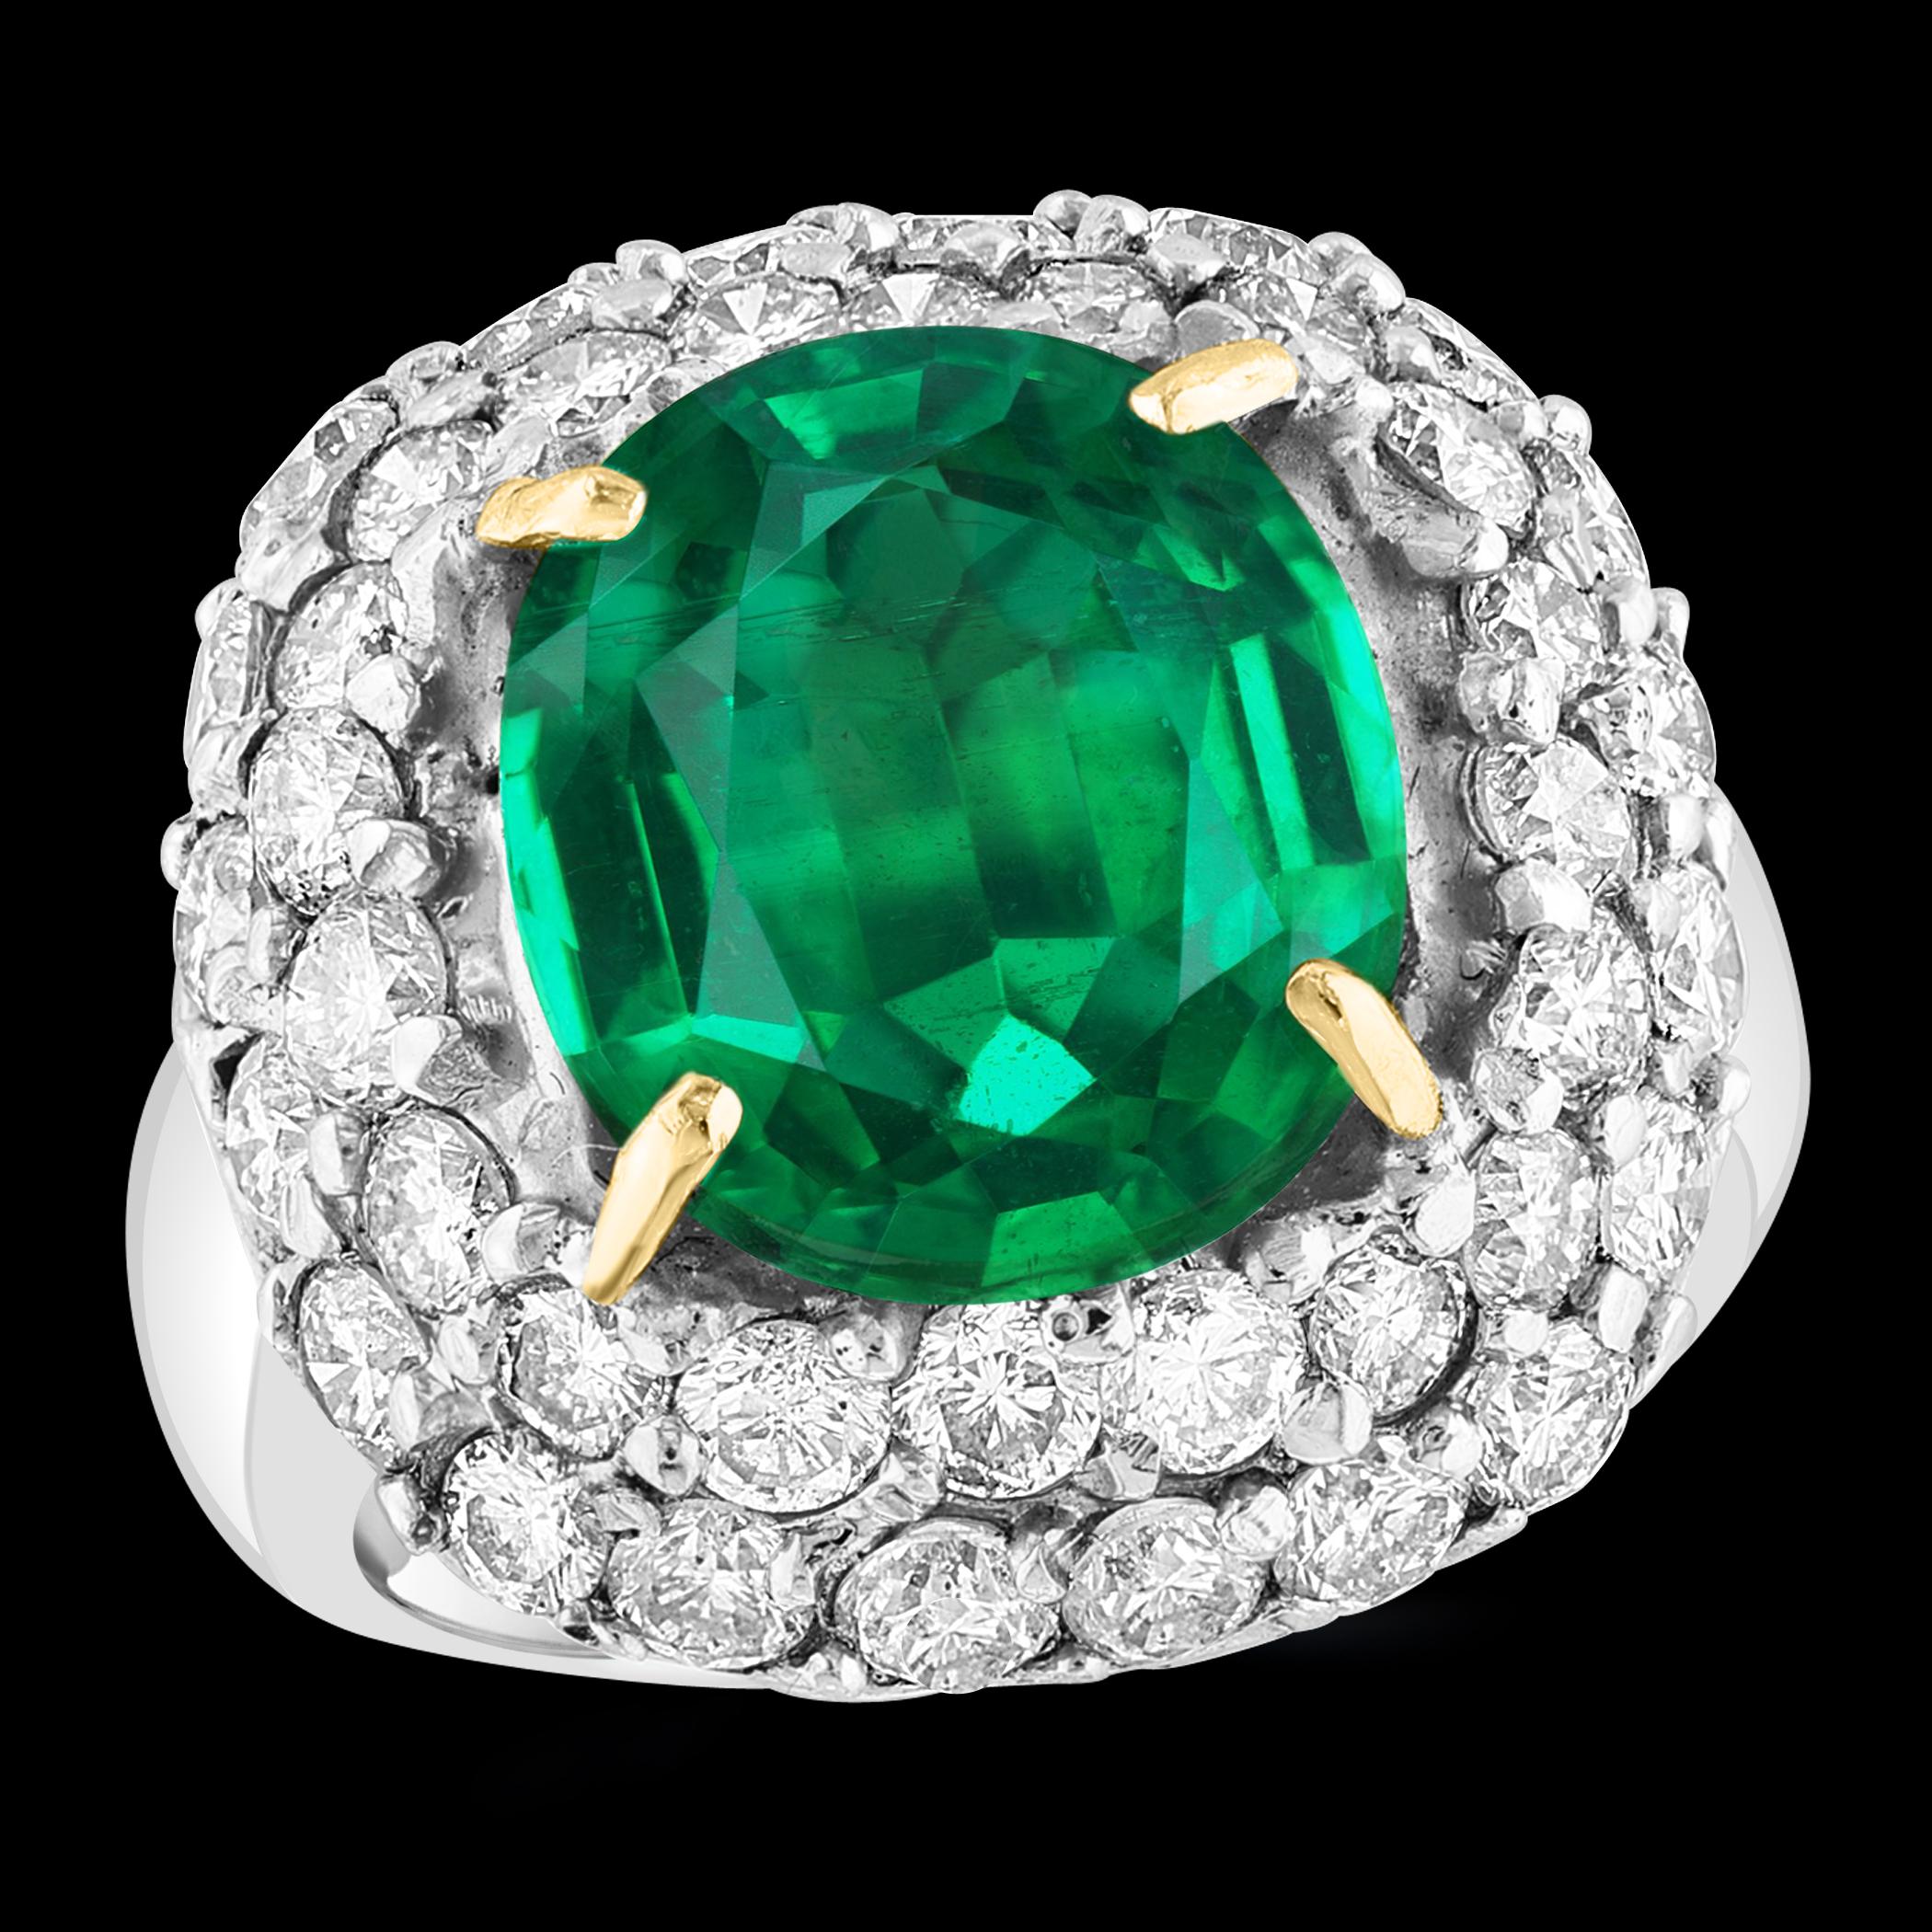 This stunning ring features a 7 Carat Cushion Cut Colombian Emerald set alongside 3.5 Carats of brilliant round diamonds in a platinum setting. The emerald is  absolutely gorgeous, highly desirable in color, and of extremely fine quality, boasting